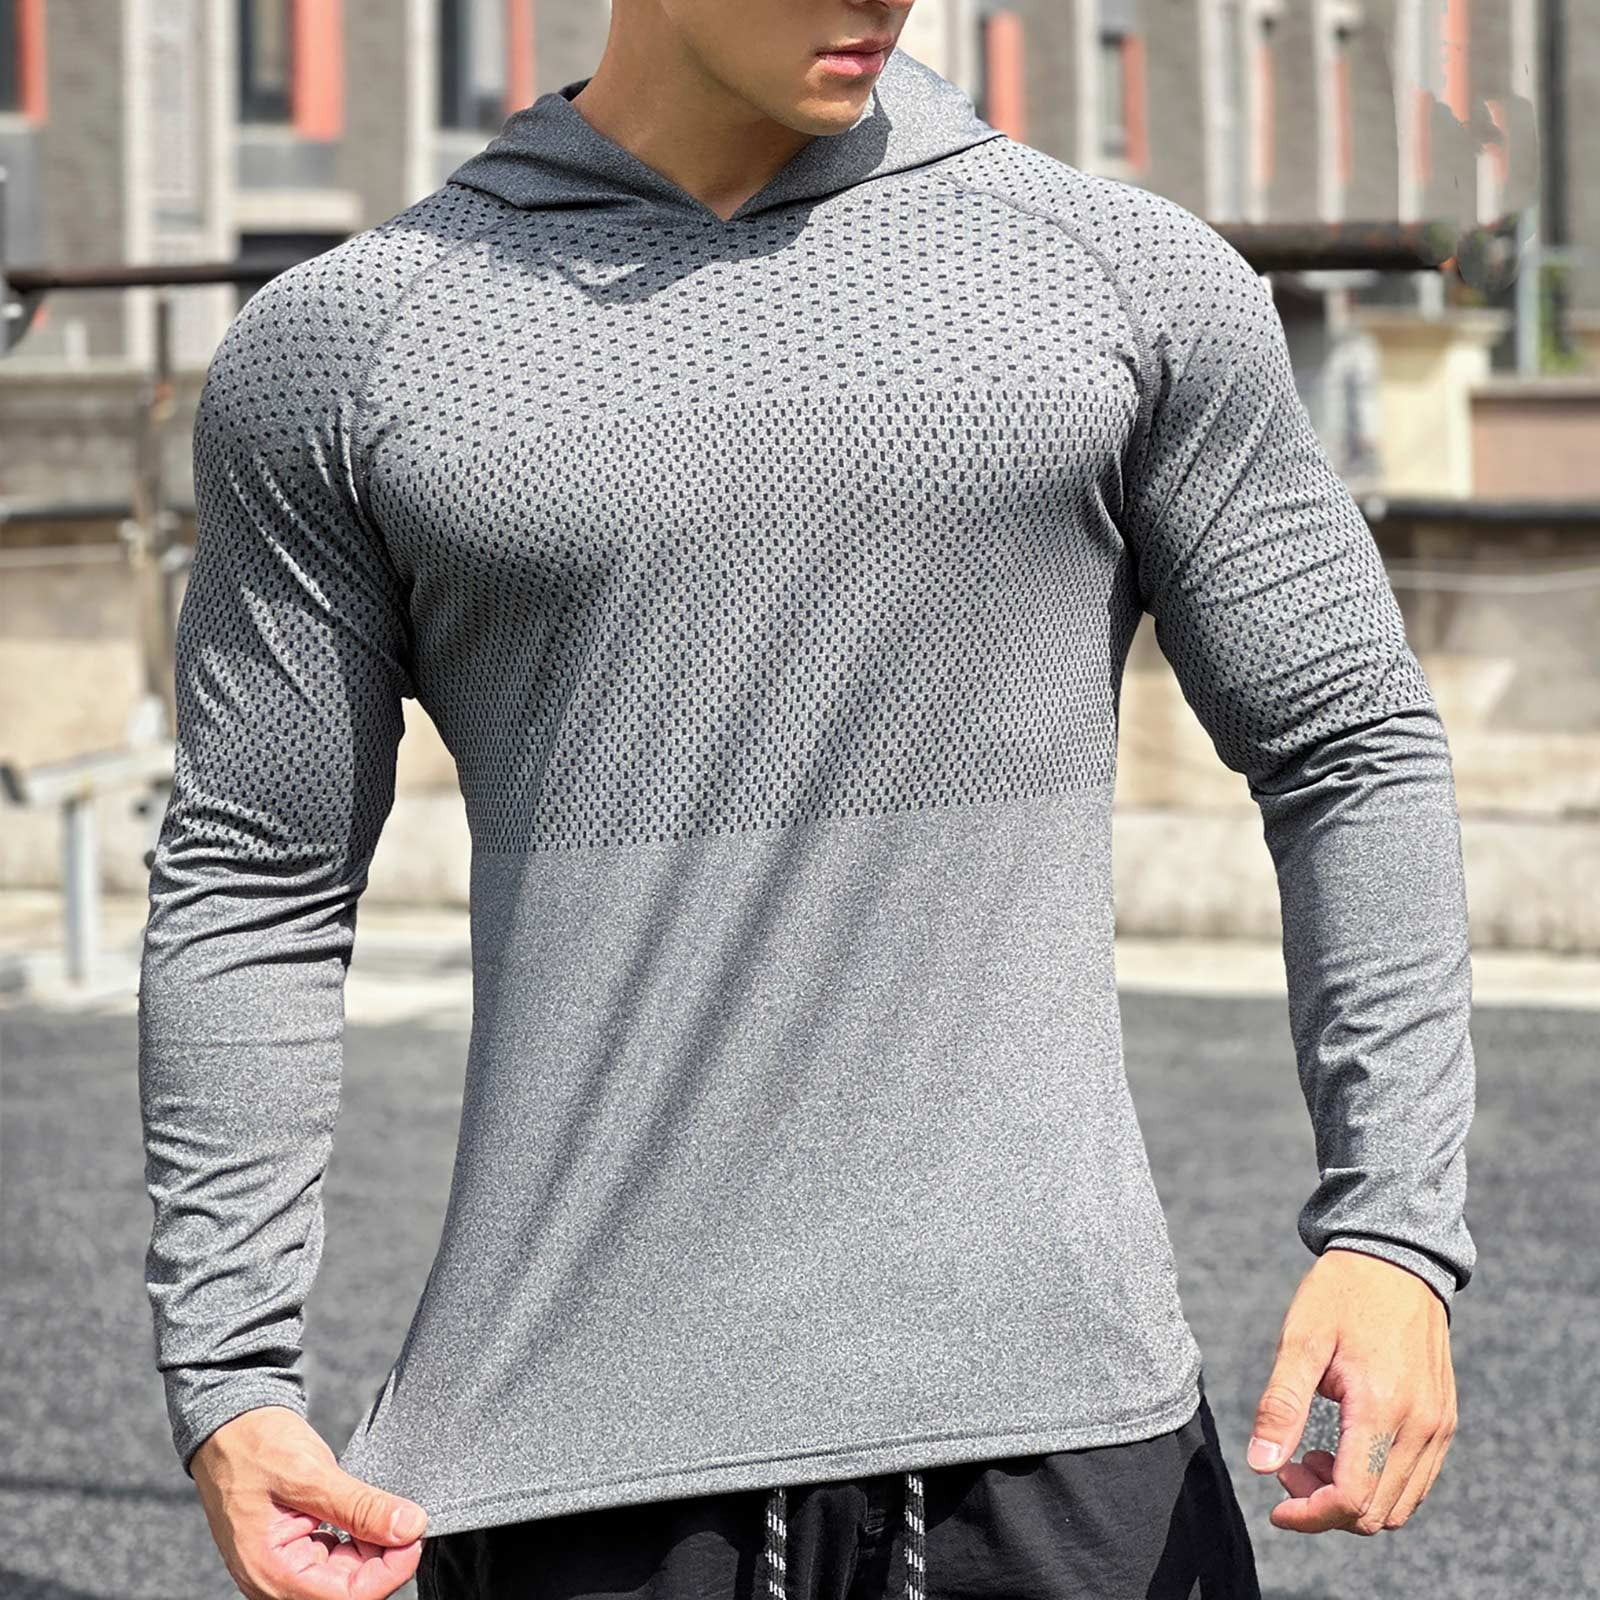 Gephdiin Polo Shirts for Men Long Sleeve Shirts for Men Fitness Outdoor ...